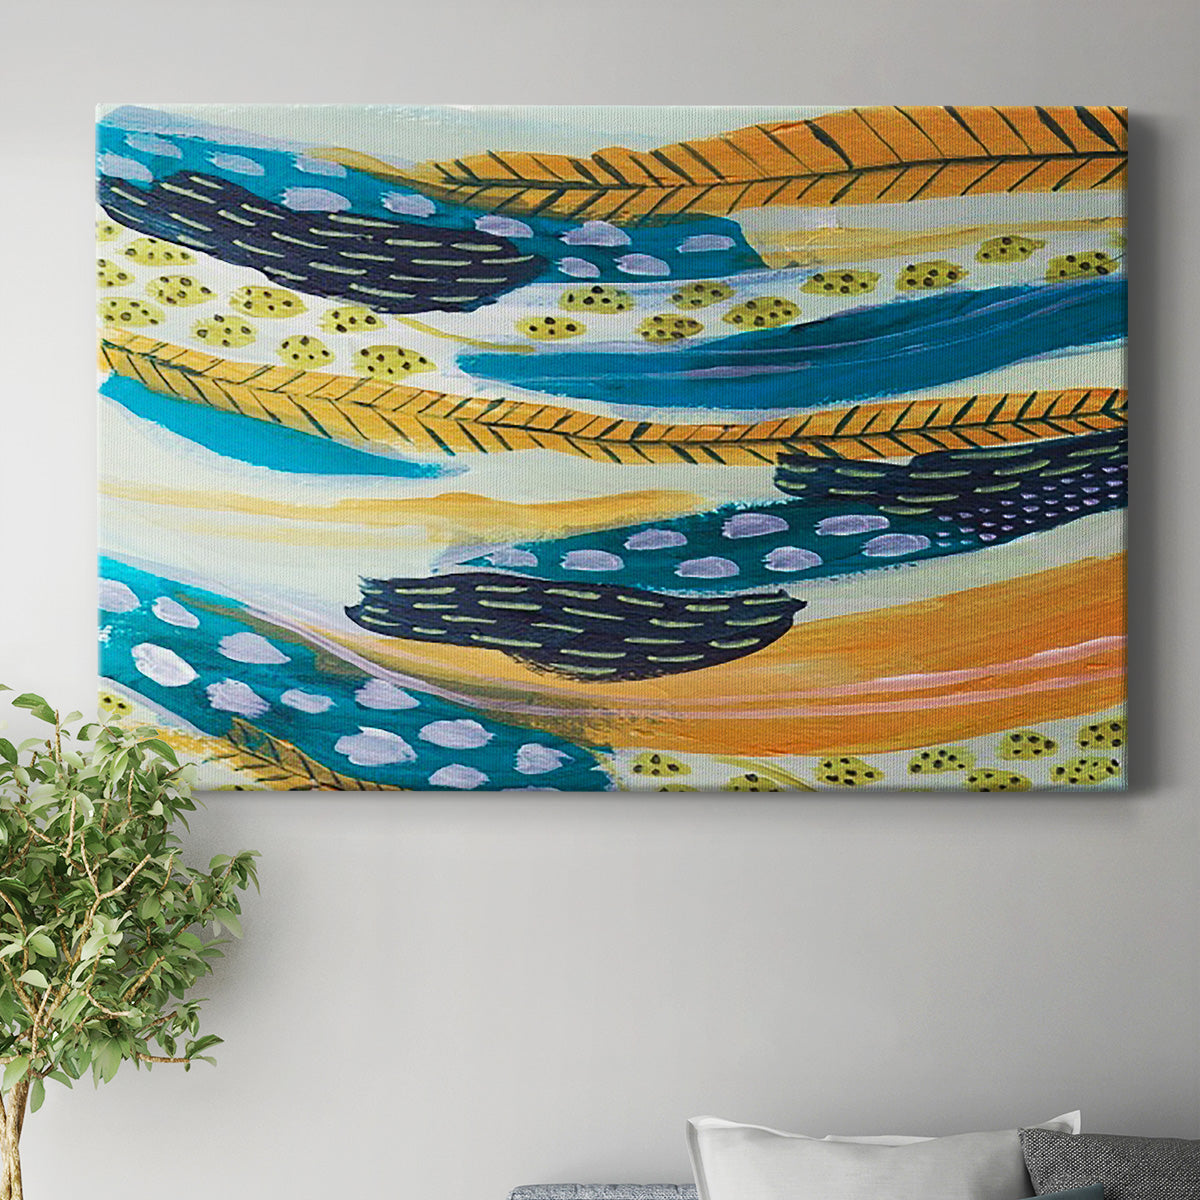 Feathery III Premium Gallery Wrapped Canvas - Ready to Hang